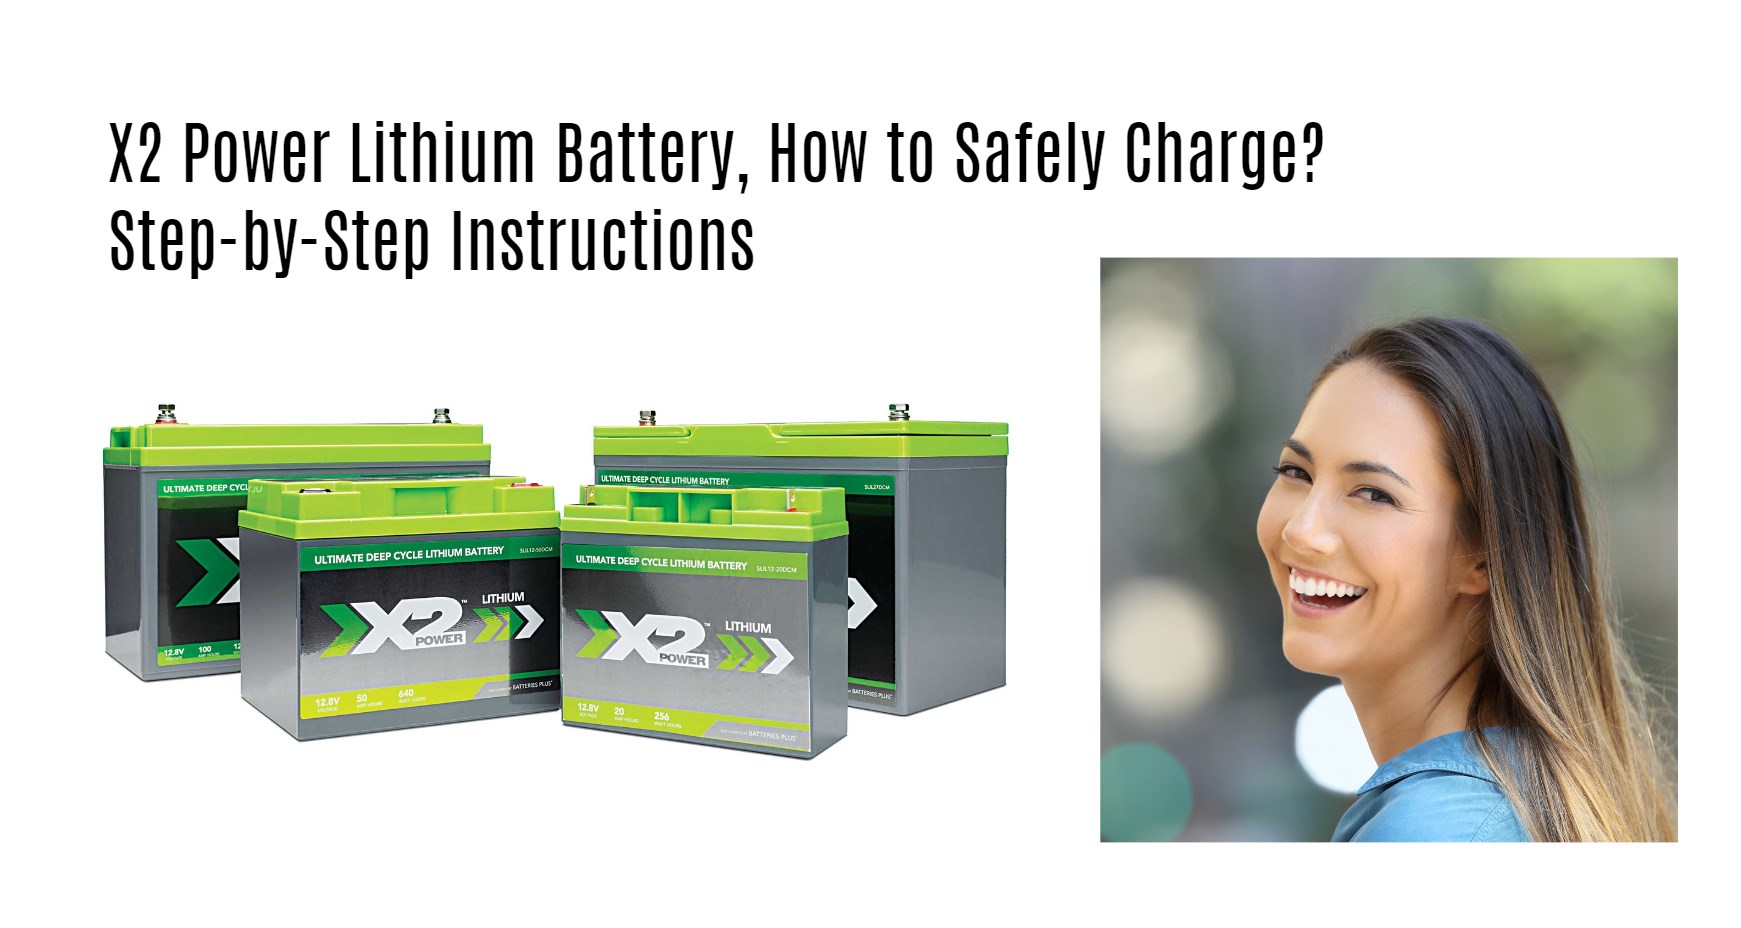 X2 Power Lithium Battery, How to Safely Charge? Step-by-Step Instructions